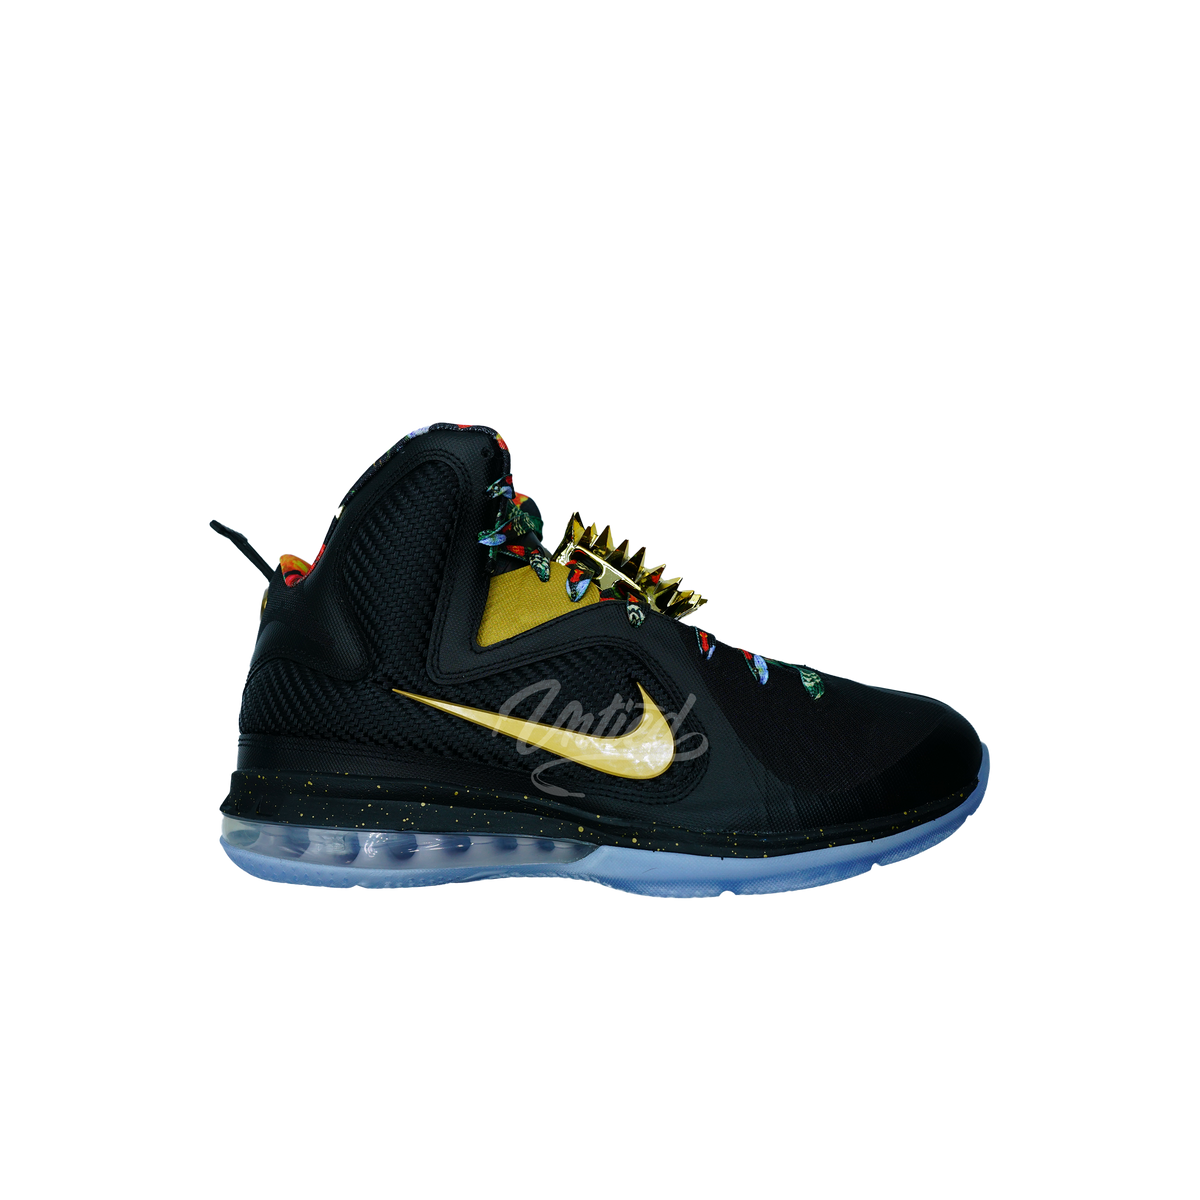 Lebron 9 "Watch The Throne"